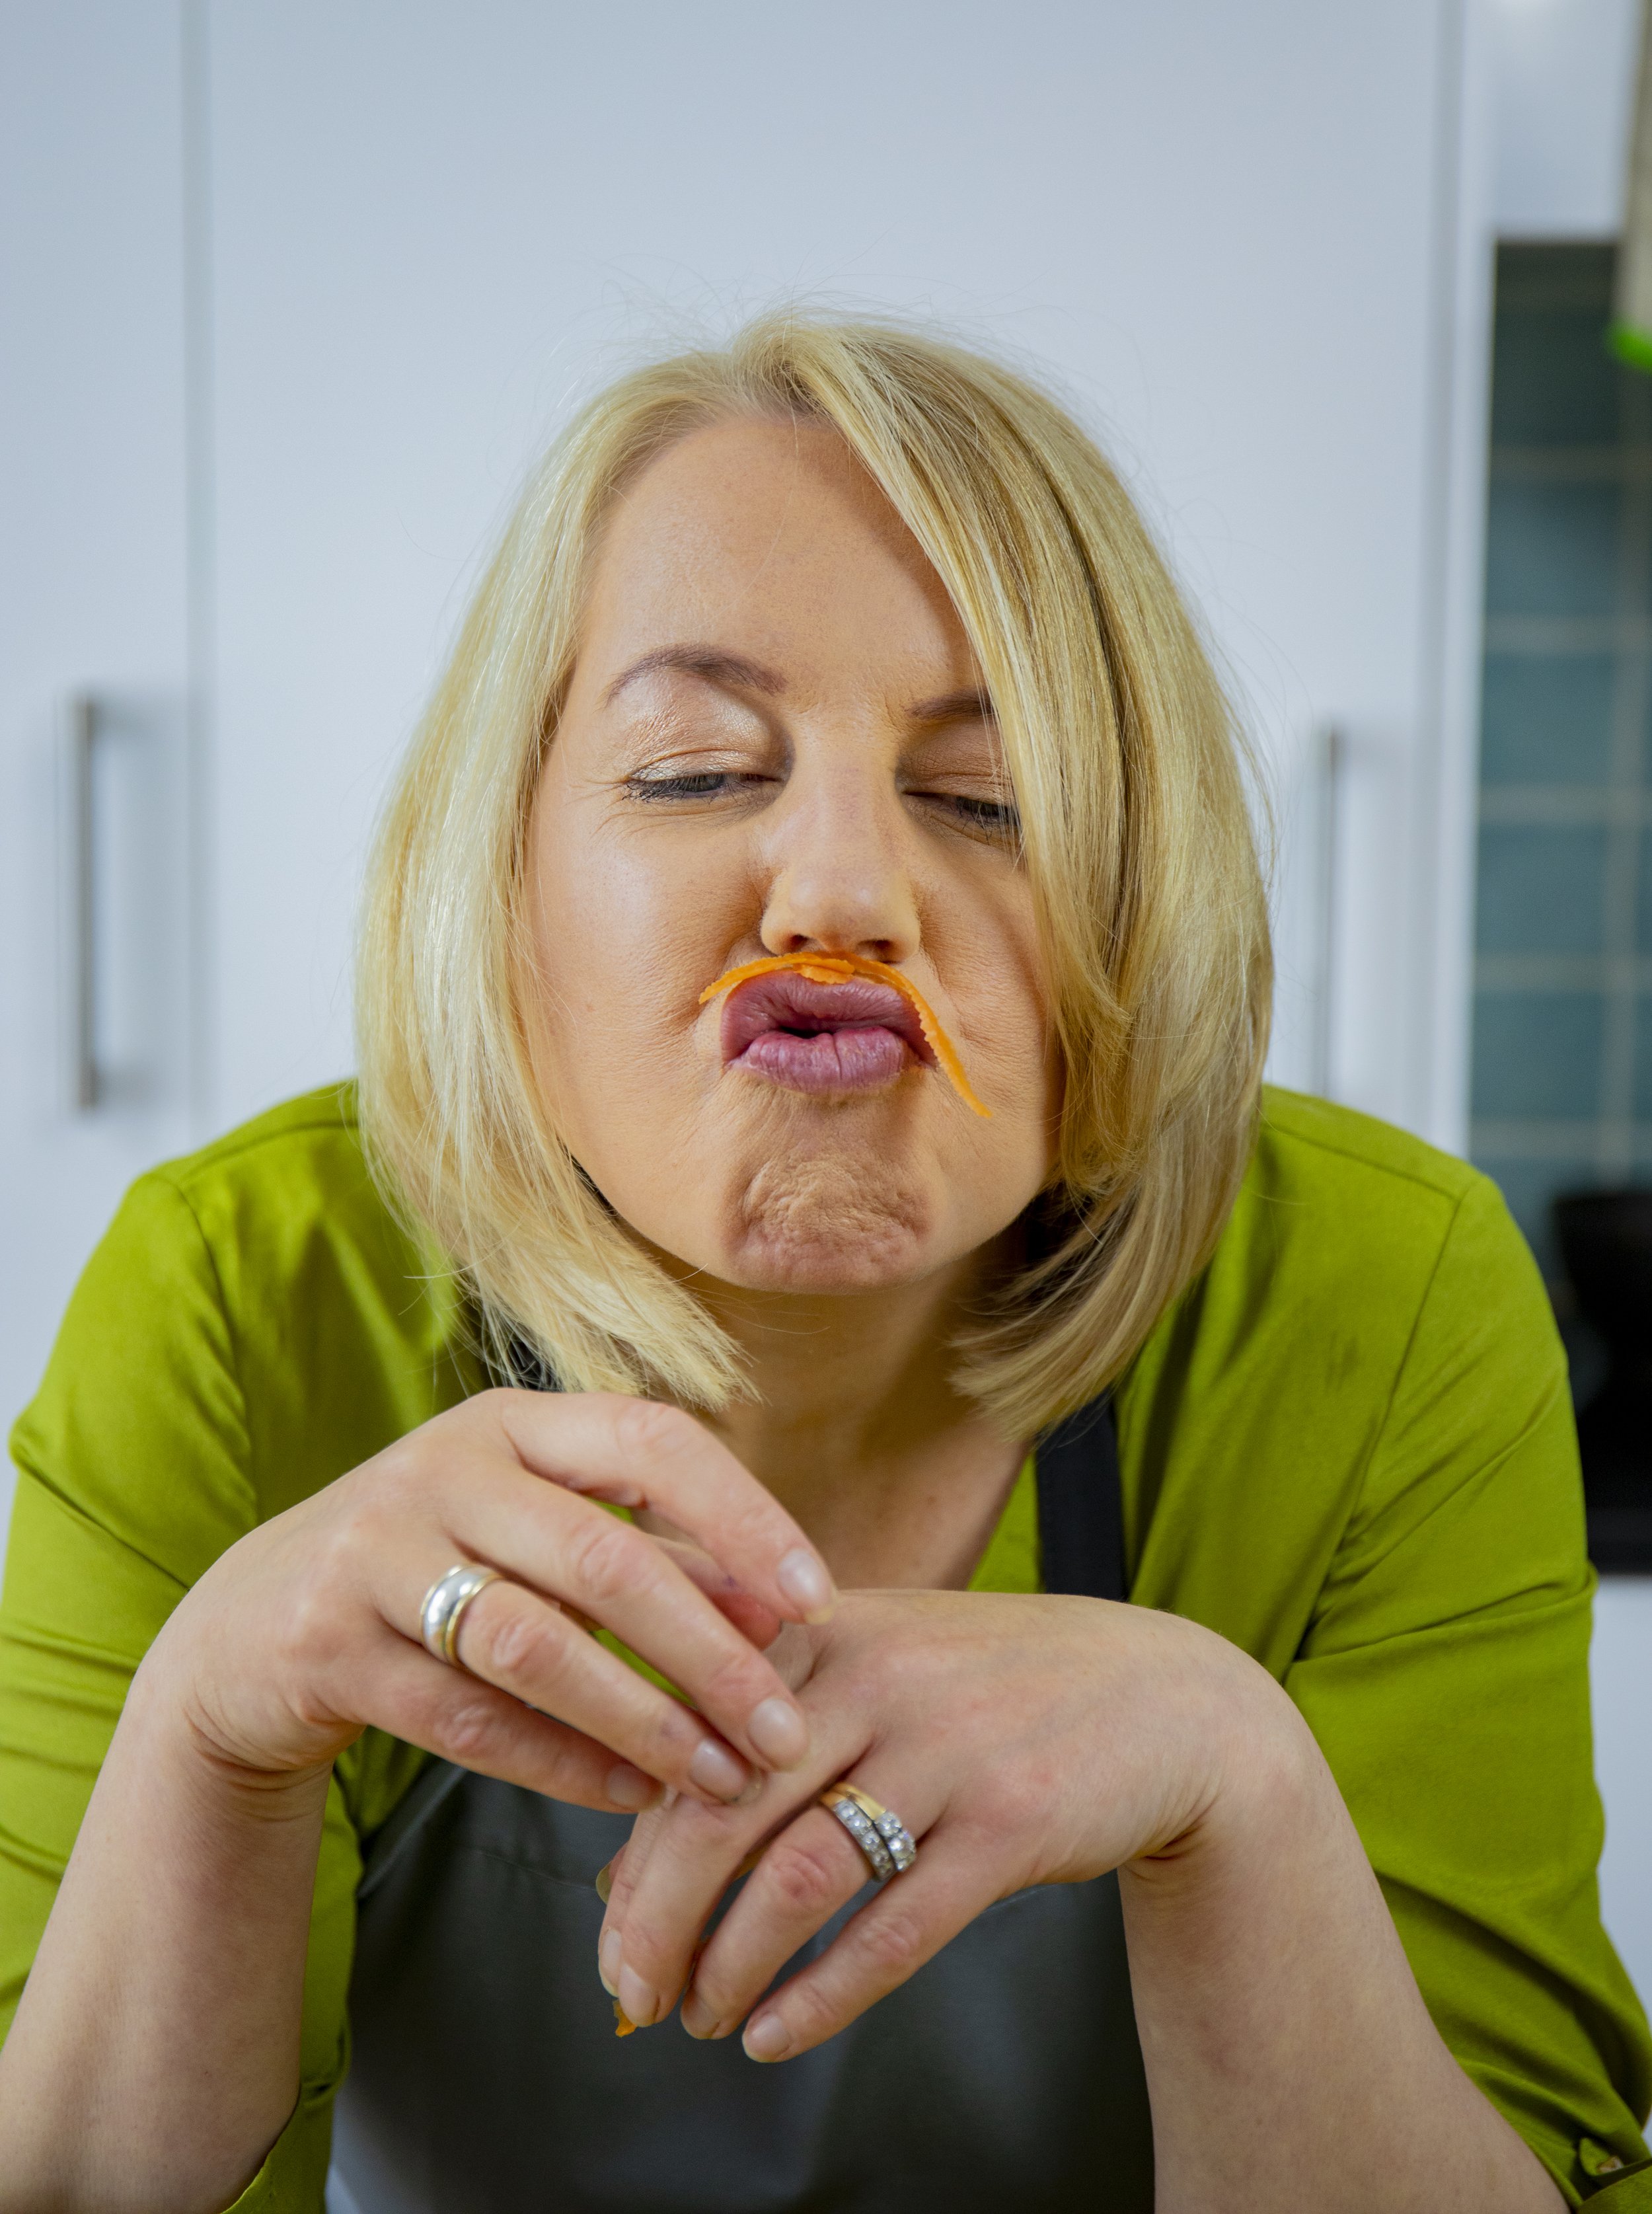 Deirdre Doyle The Cool Food School online programme - with carrot mustache.jpg